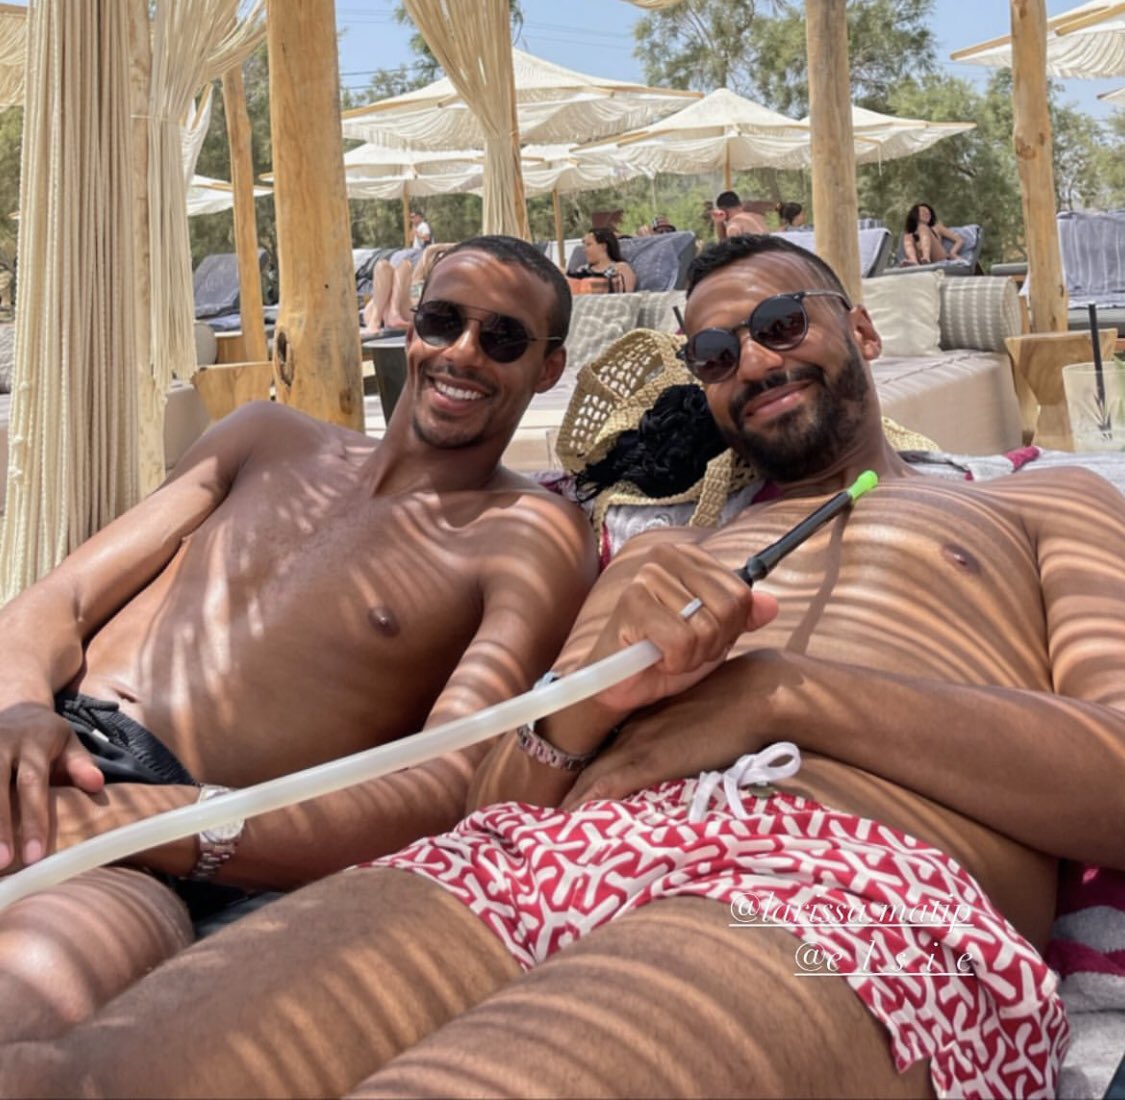 LiverpoolGoals on X: "Matip on holiday in Mykonos with his brother ️️️  https://t.co/IzPqA9PCv7" / X